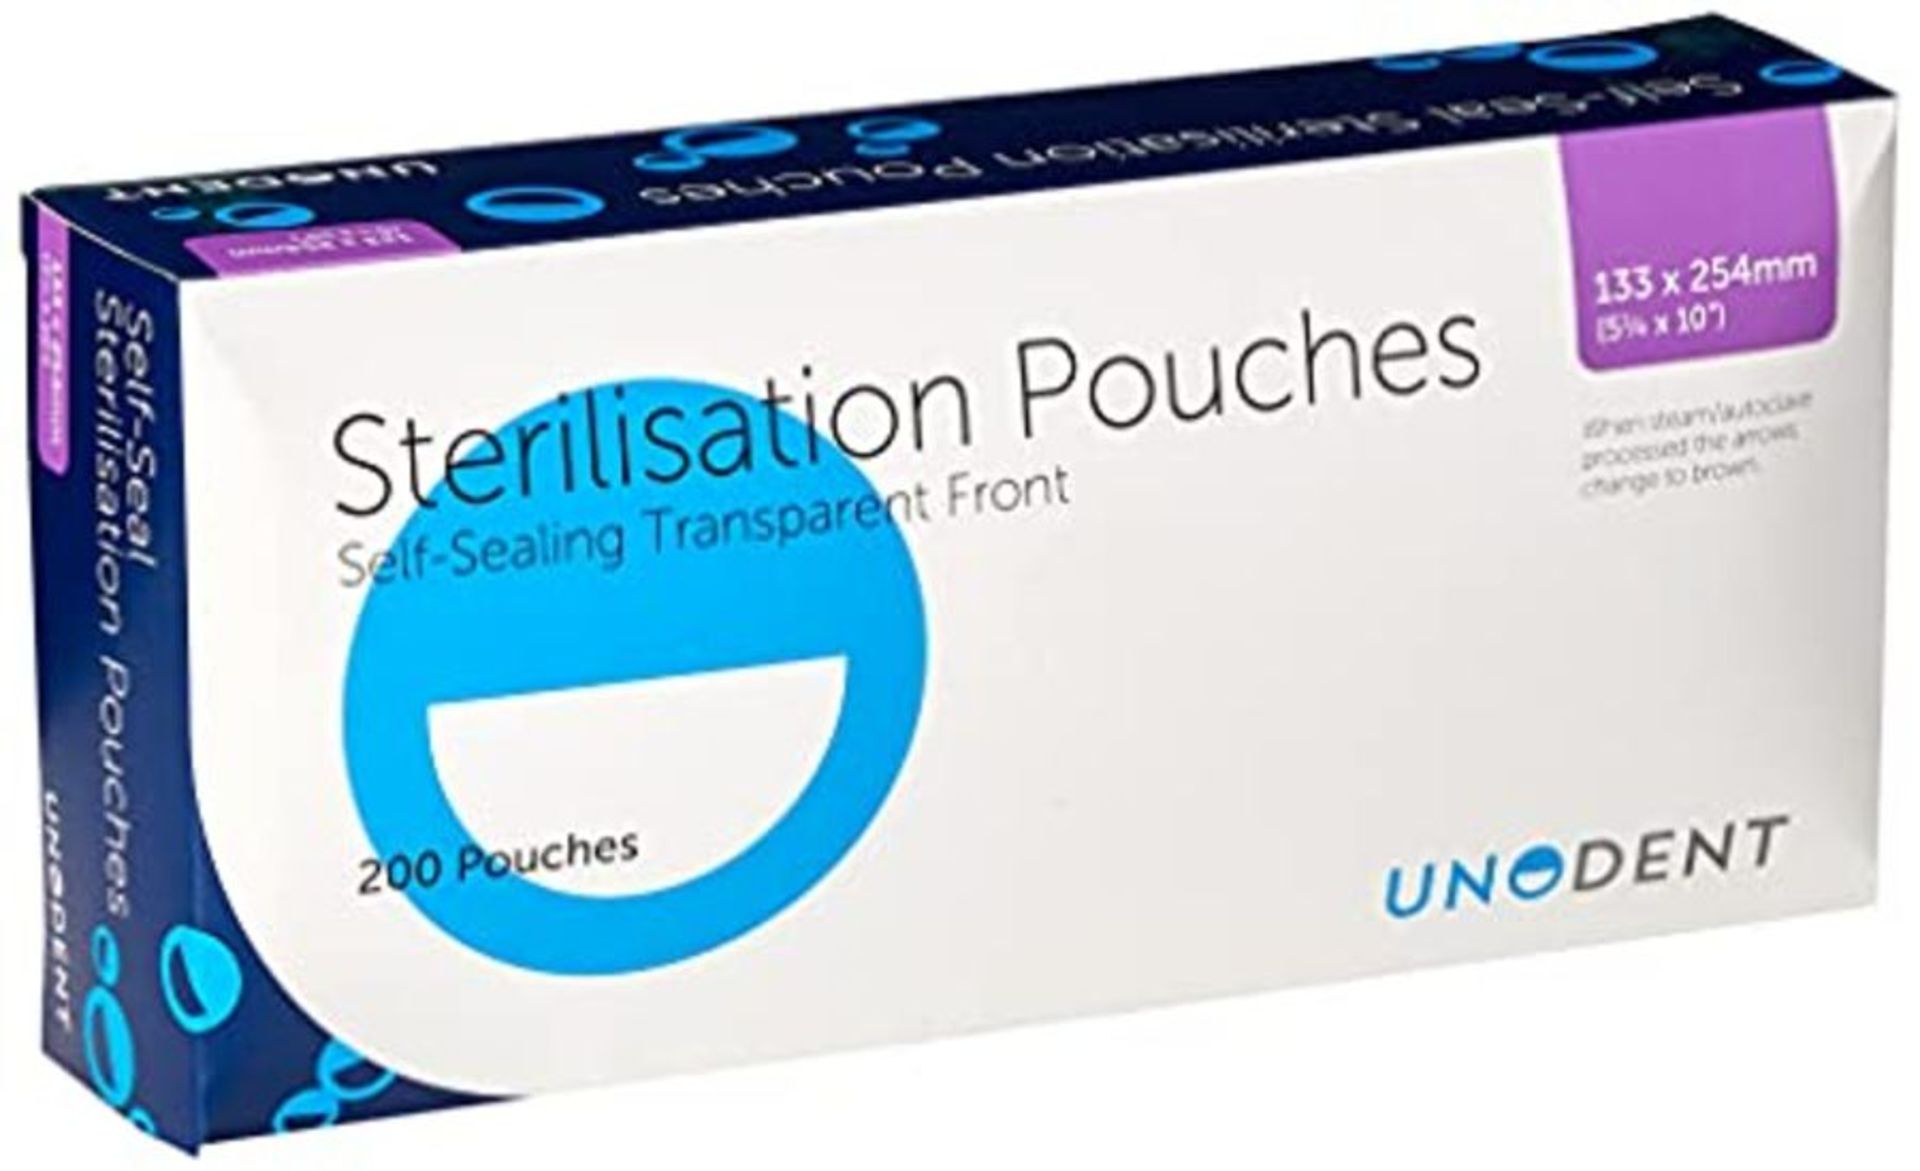 UnoDent GBS525 Sterilisation Pouch, 135 mm x 254 mm (Pack of 200)